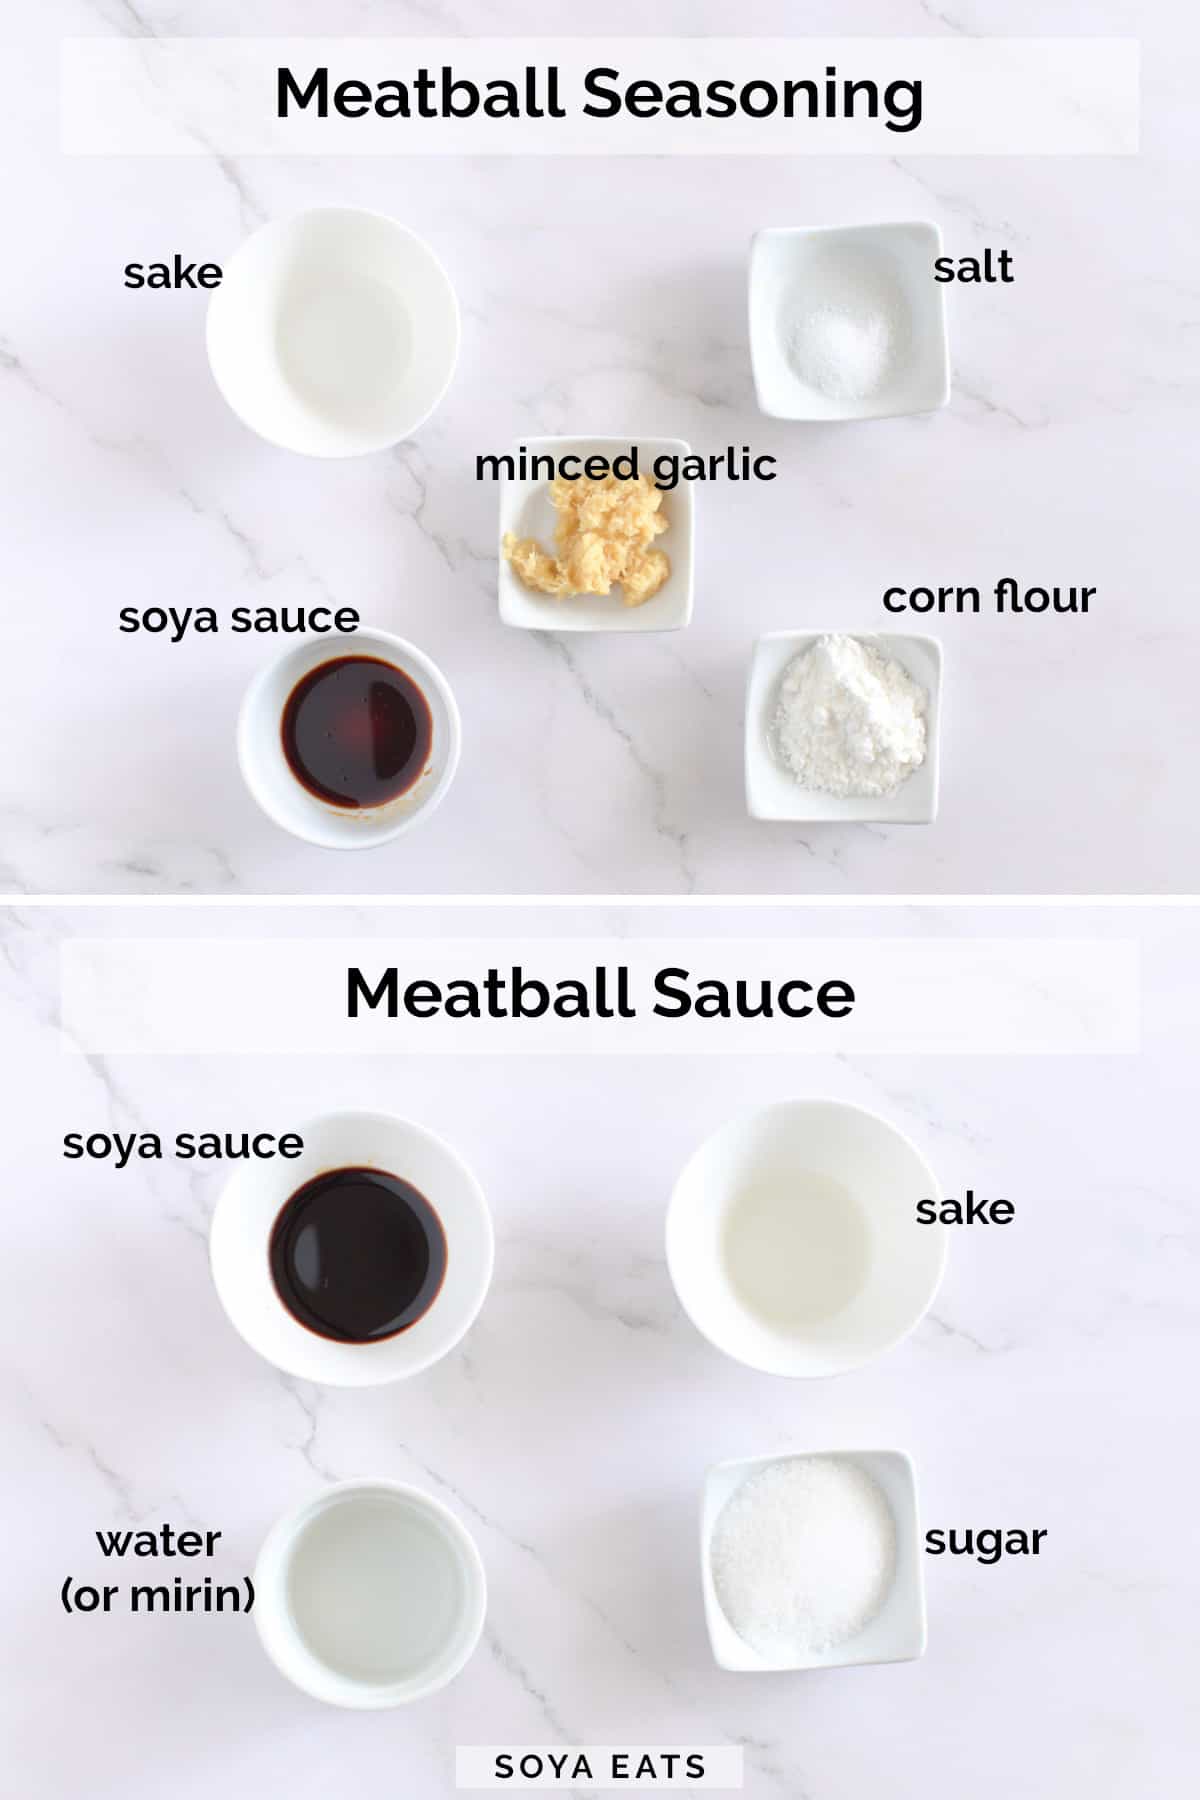 Image of ingredients for meatball seasoning and sauce.